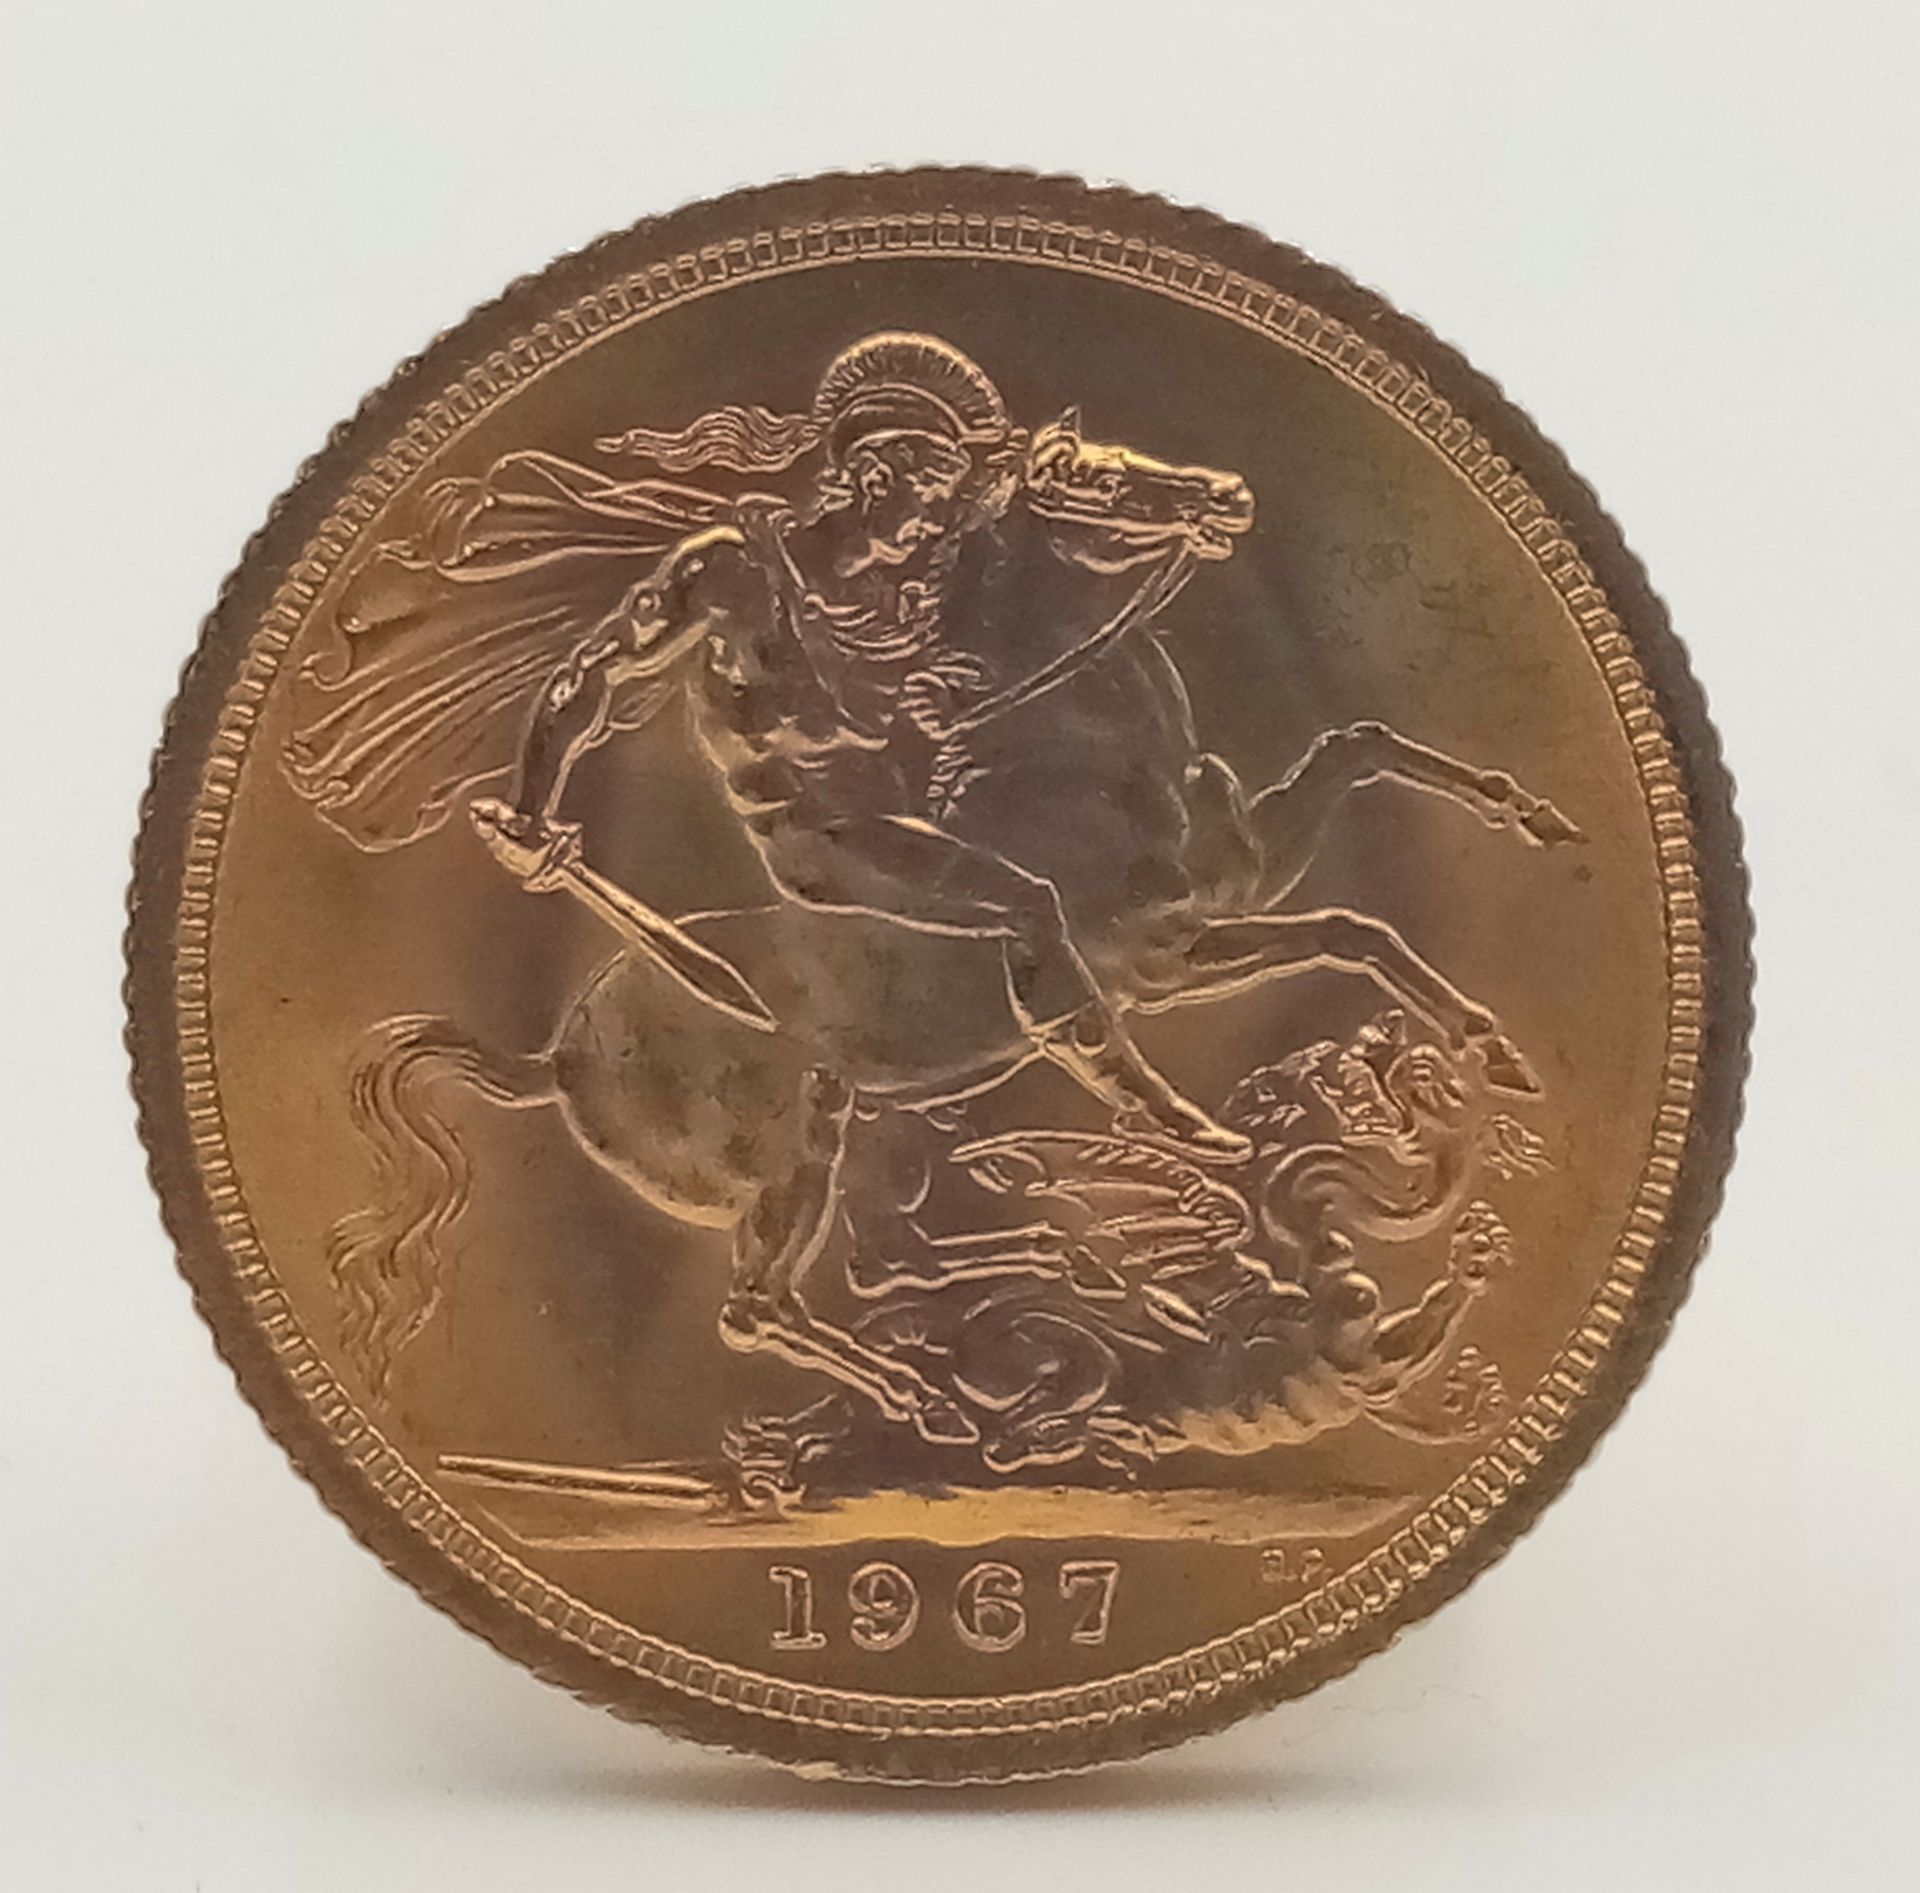 A 22 K yellow gold, Queen Elizabeth II, 1967, sovereign, full weight (8 g.), good condition, but